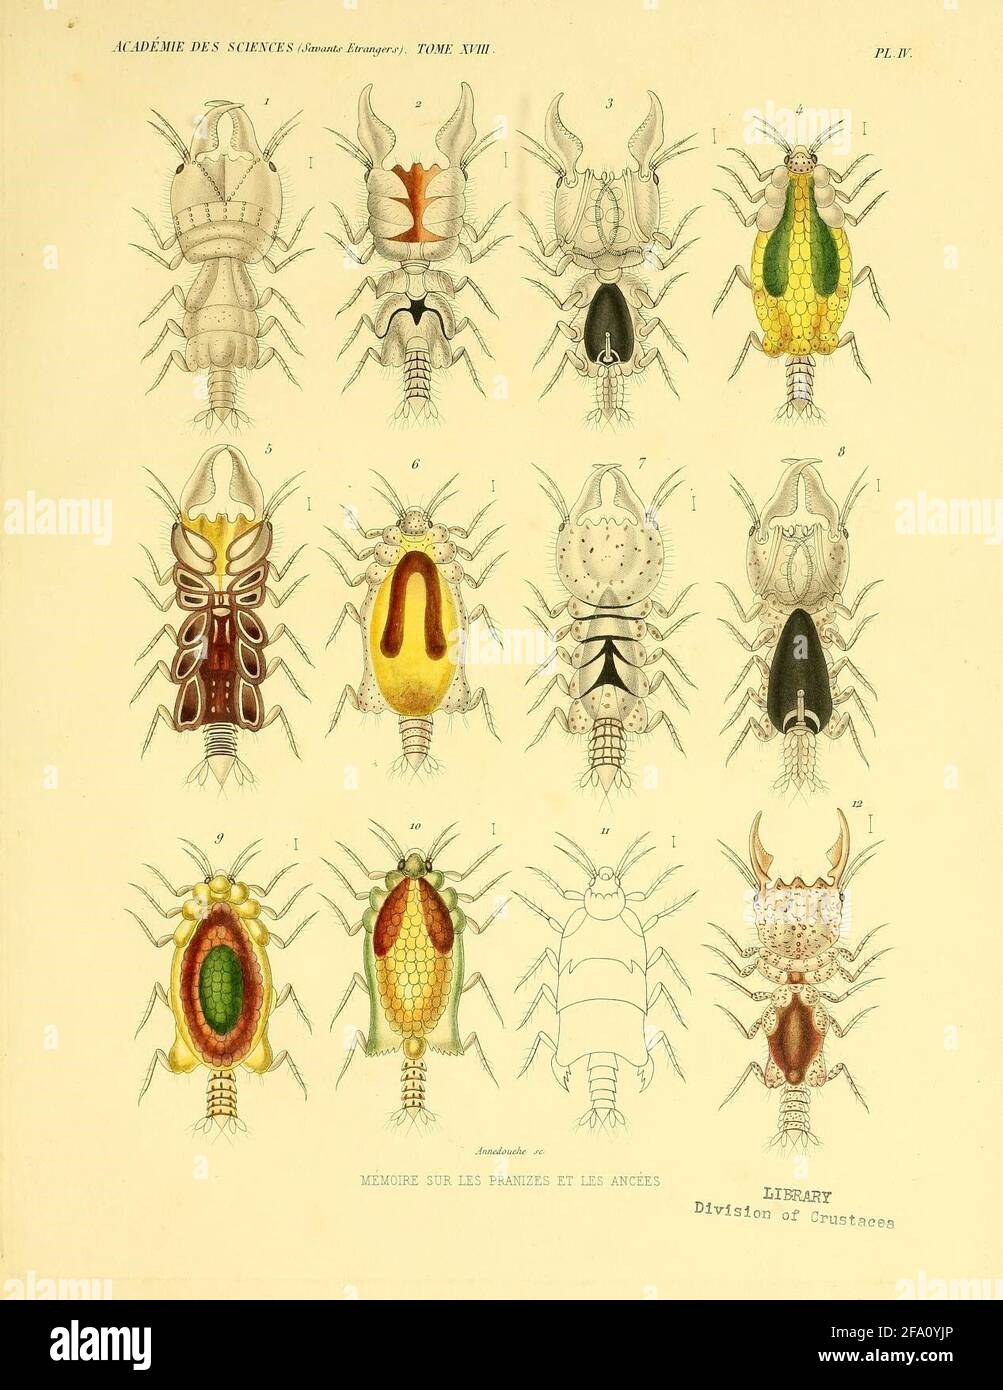 Memoir on pranizes and ancées and on the curious means by which certain parasitic crustaceans ensure the conservation of their species Paris: Impr. imperial, 1864. Stock Photo